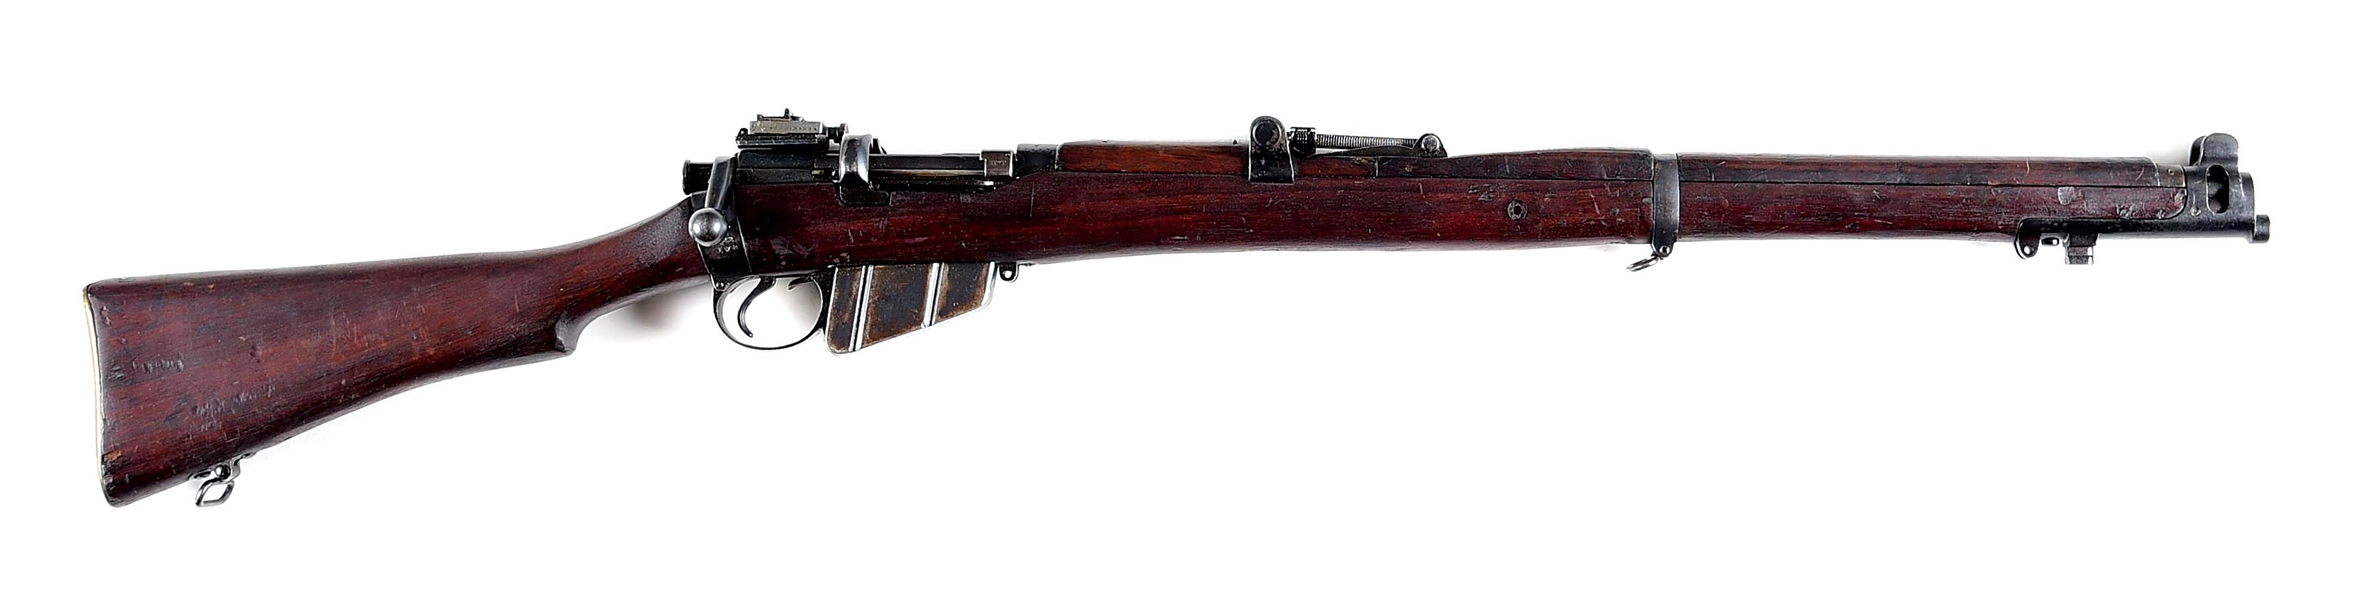 (C) ENFIELD MK IV* BOLT ACTION RIFLE CONVERTED TO .22 LR BY BSA.